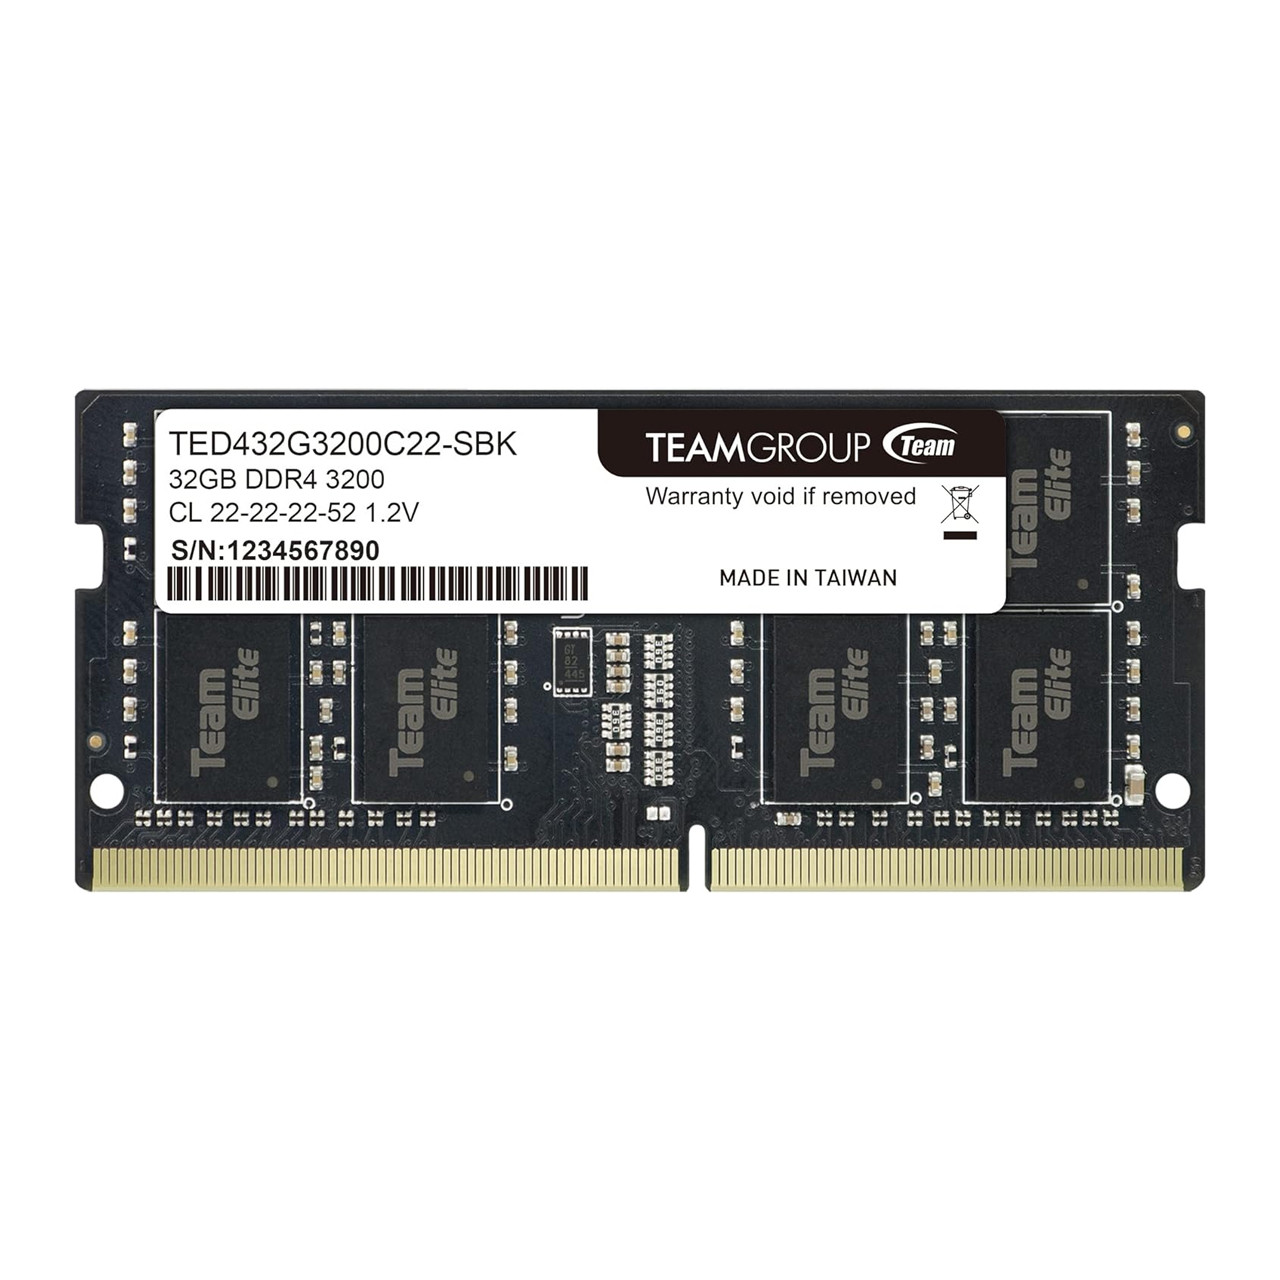 TEAMGROUP Elite DDR4 32GB Single 3200MHz PC4-25600 CL22  Non-ECC 1.2V SODIMM for Laptop, Notebook TED432G3200C22-S01